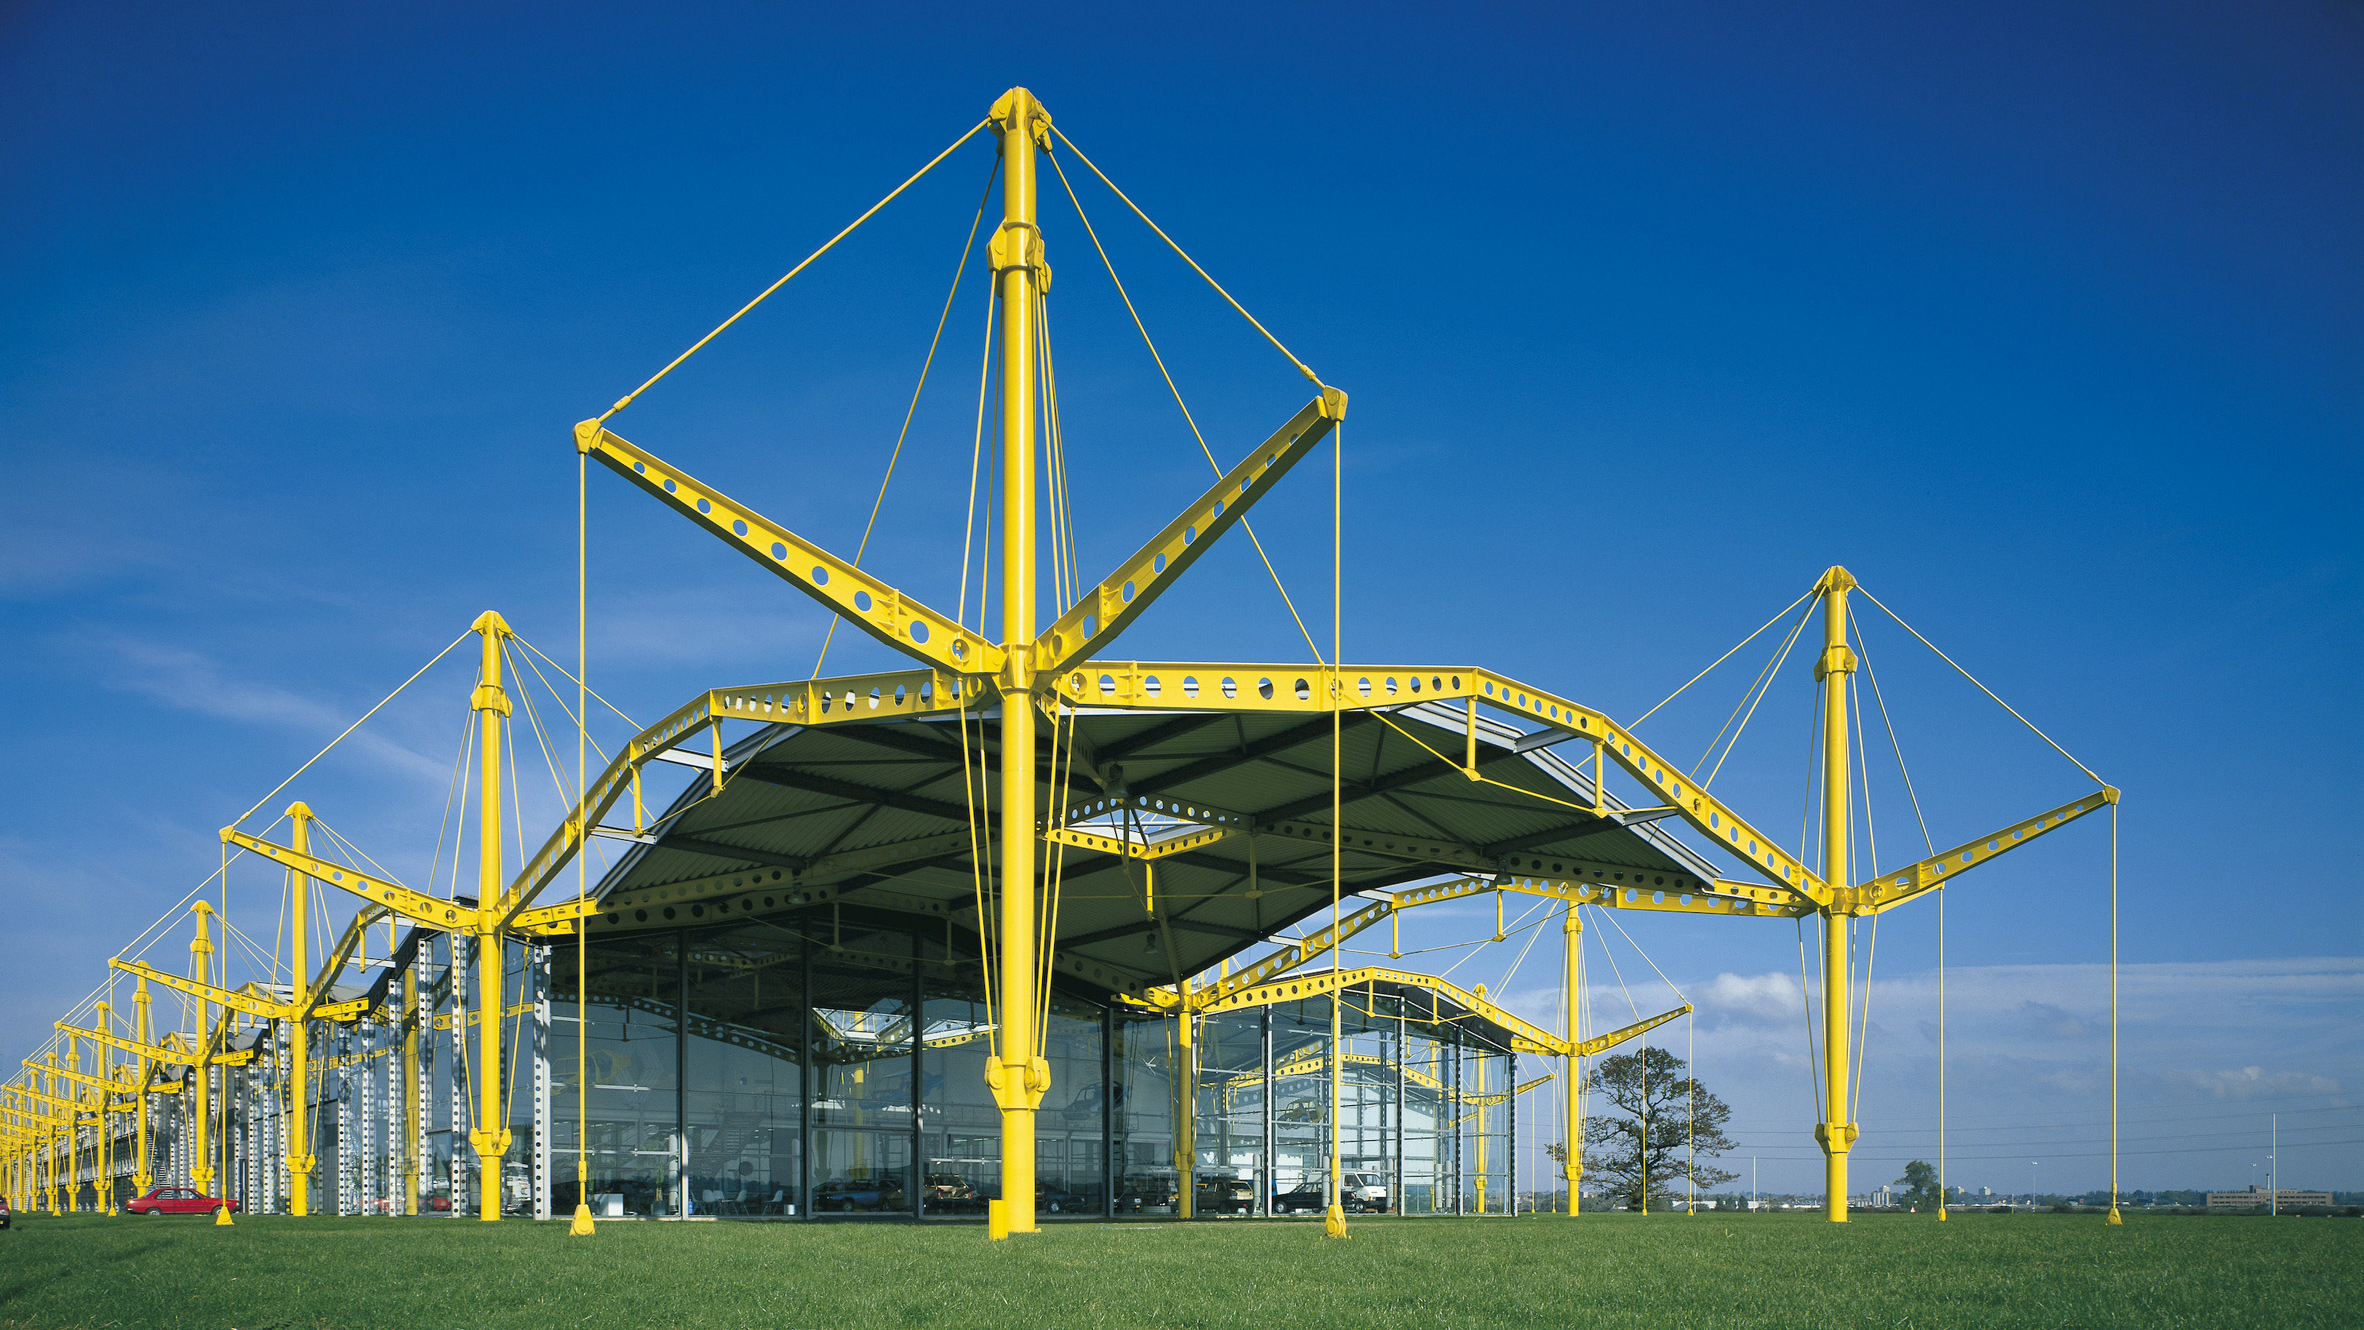 Norman Foster's Renault Distribution Centre is high-tech